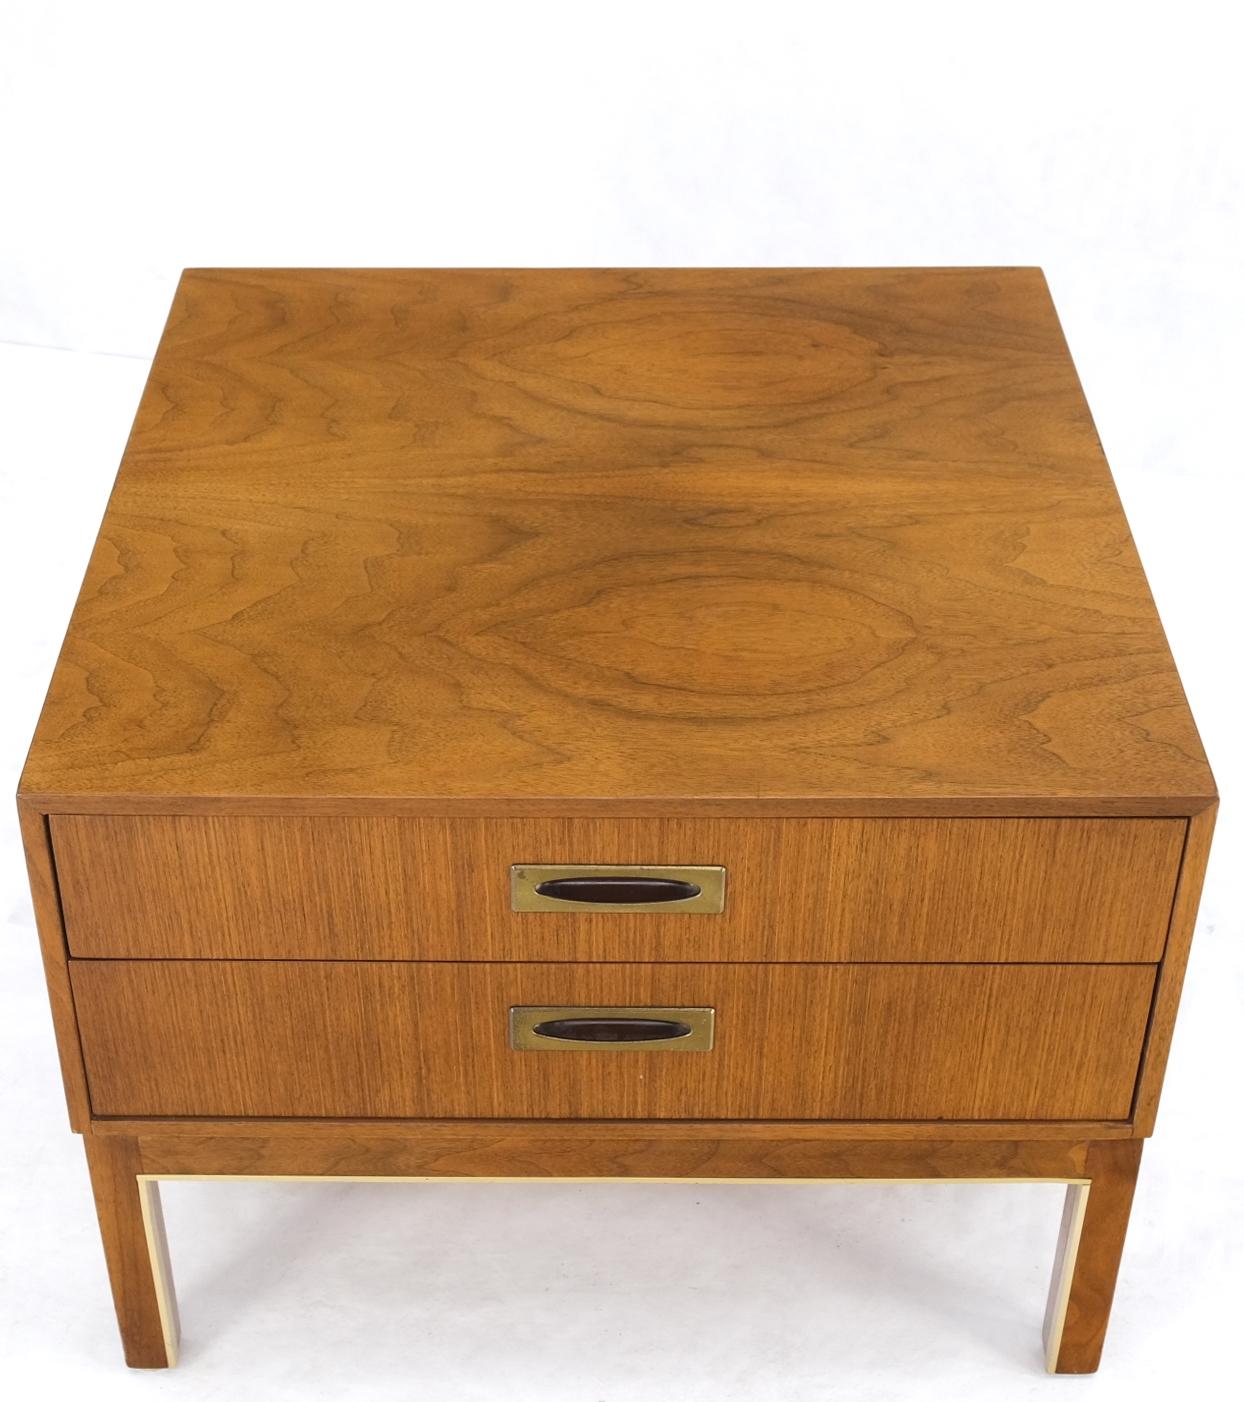 Large Oversize Cube Shape Square 2 Drawers Light Walnut Nightstand Table Mint In Good Condition For Sale In Rockaway, NJ